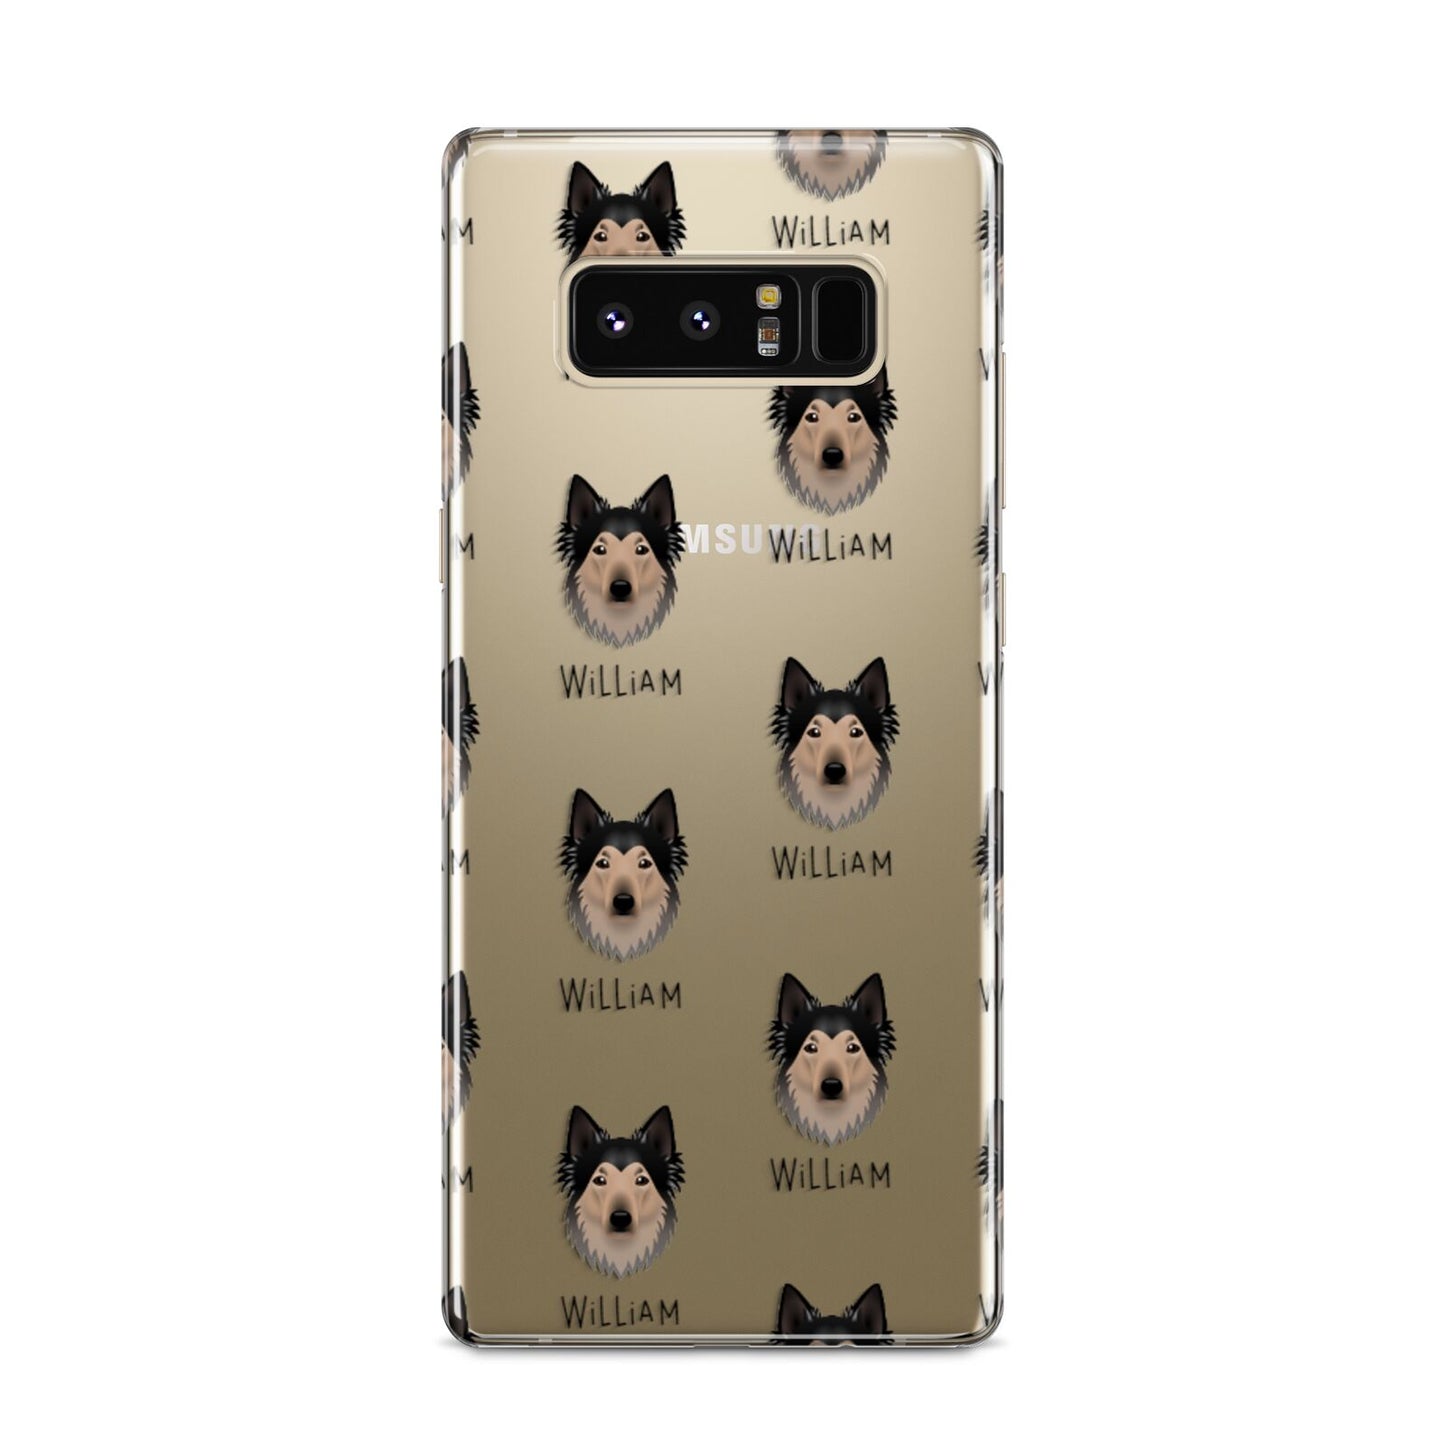 Shollie Icon with Name Samsung Galaxy S8 Case